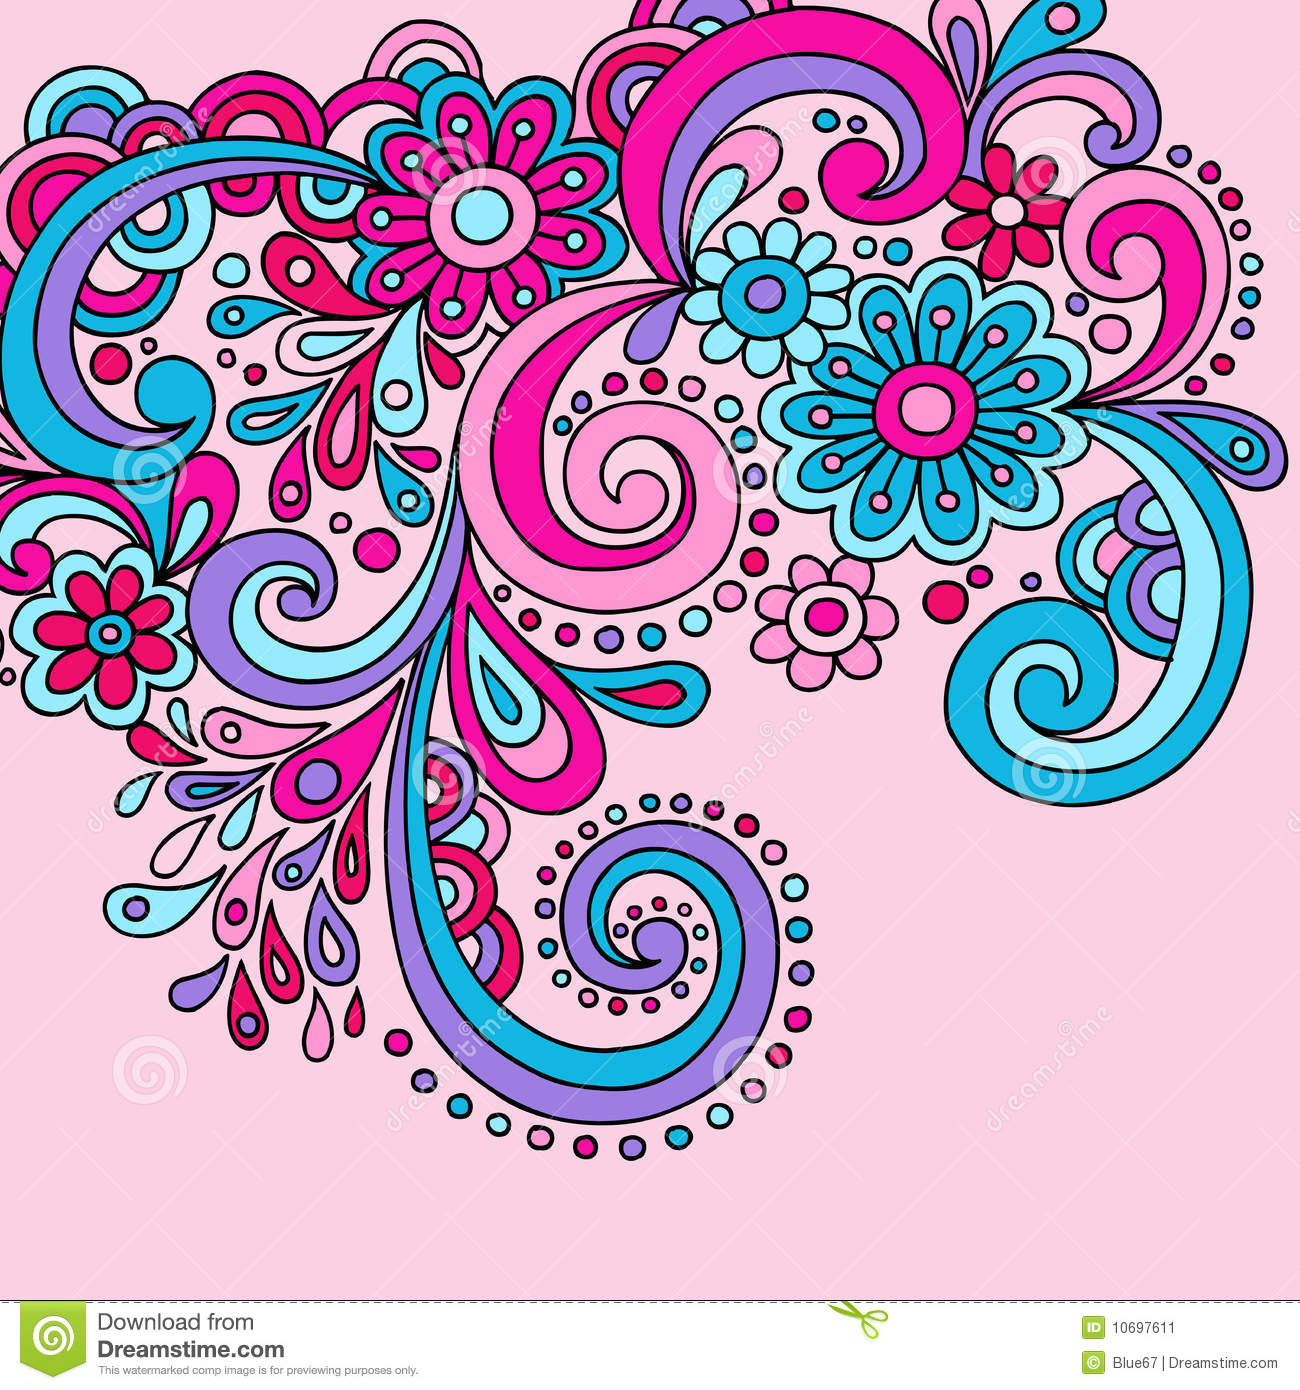 Groovy Hand Drawn Psychedelic Doodle With Flowers And Swirls Vector    